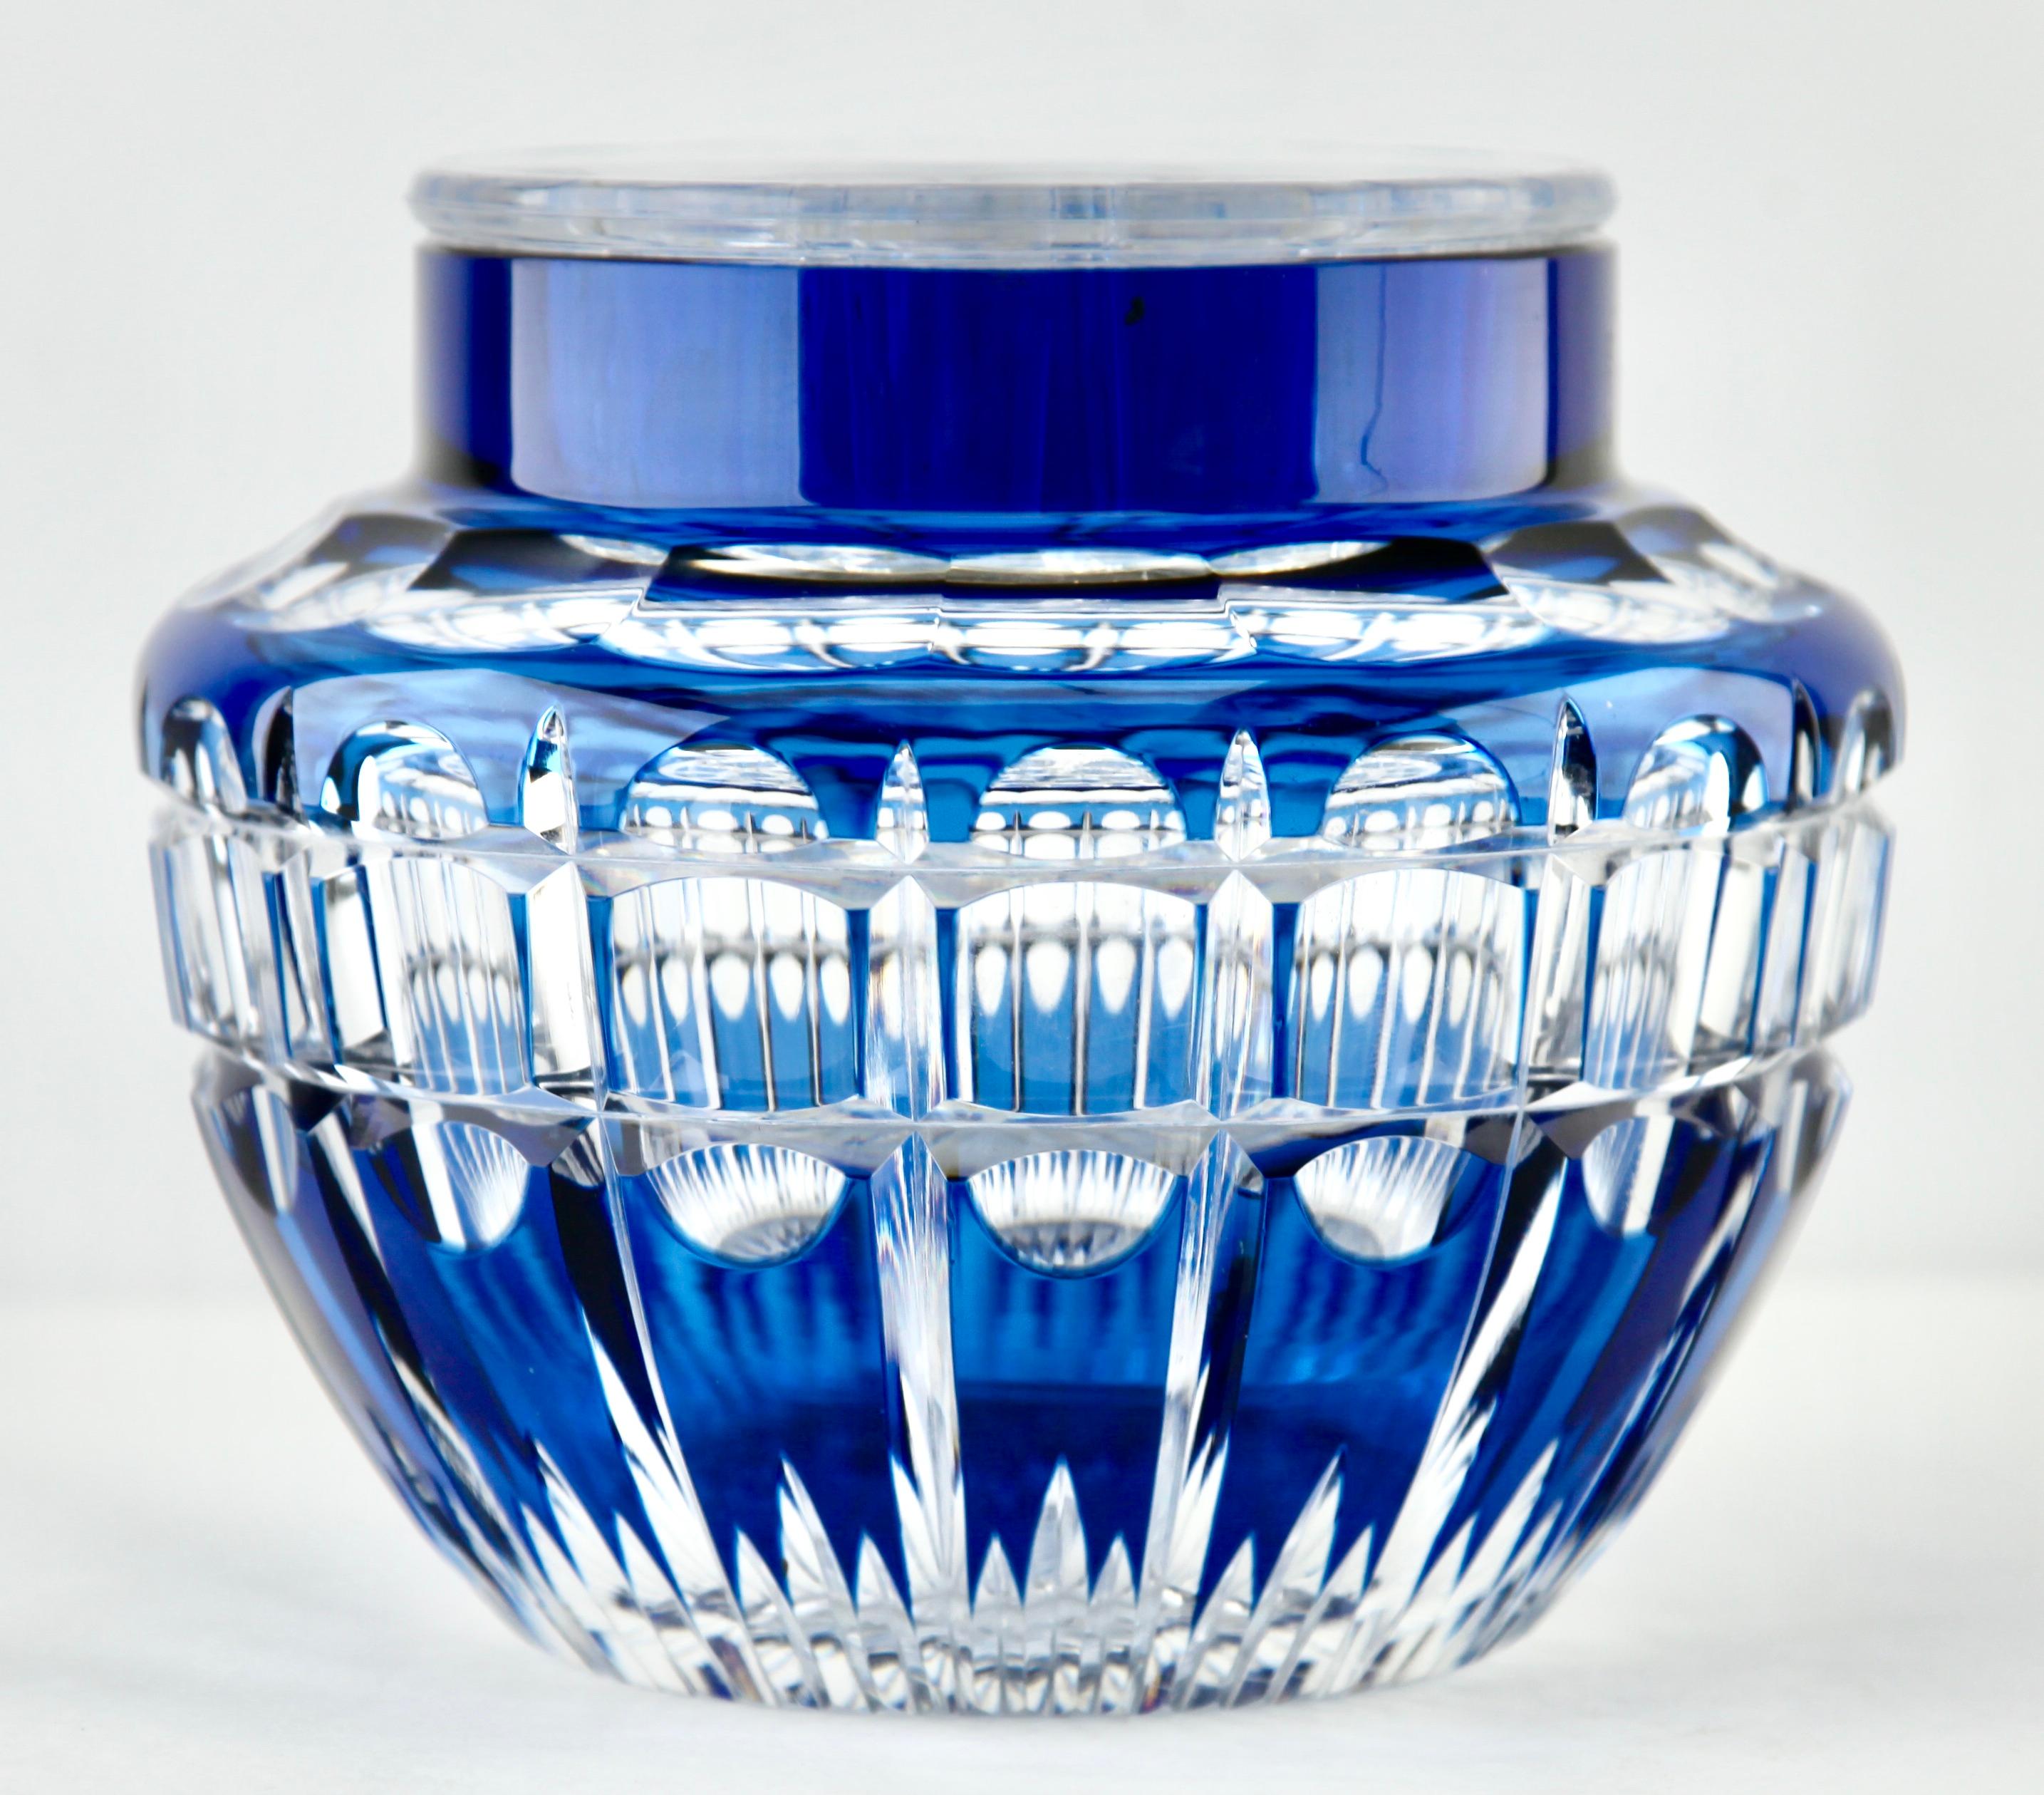 Large vibrant, Cobalt Bleu cased-crystal glass 'Pique Fleurs' vase with a cut-to-clear Art Deco decoration 
This design for vases is often called 'Pique fleurs' or 'rose-bowl' and is supplied with a fitted crystal grille to support stems in an